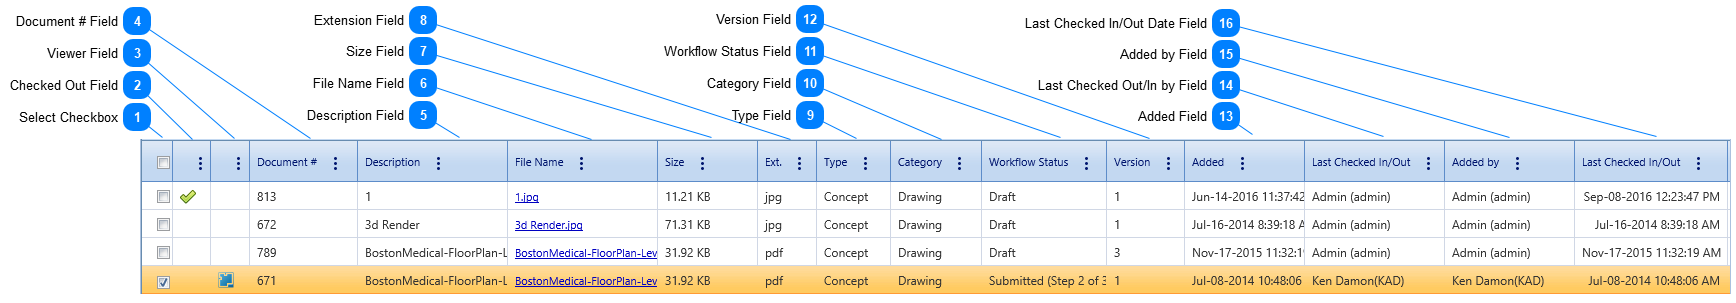 Document Manager Header Table